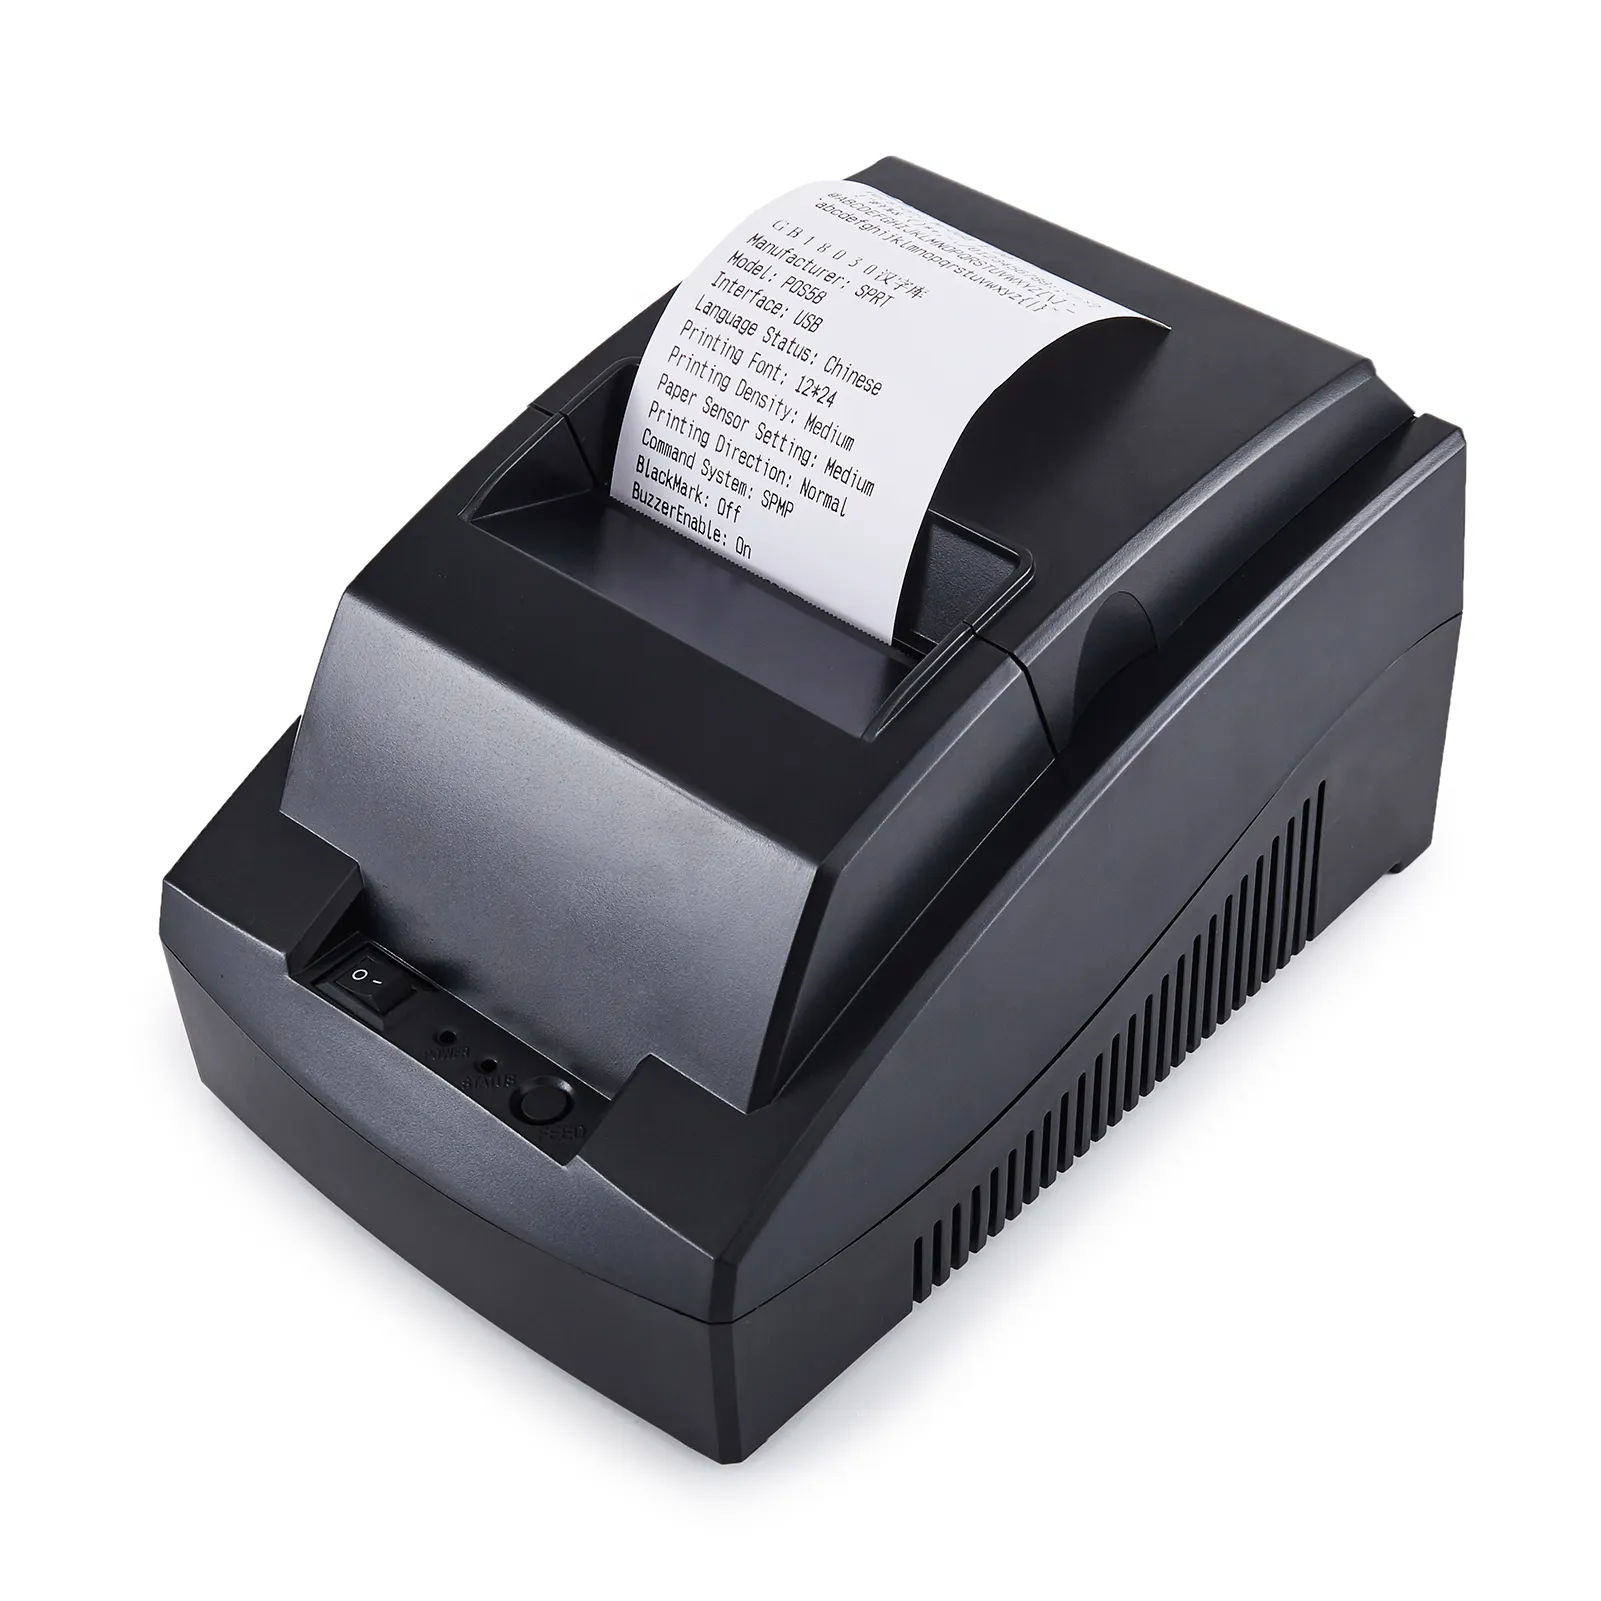 SPRT POS 5810 Serial/BT/USB Factory Direct Catering Thermal Bill Printer Compatible with Multiple System